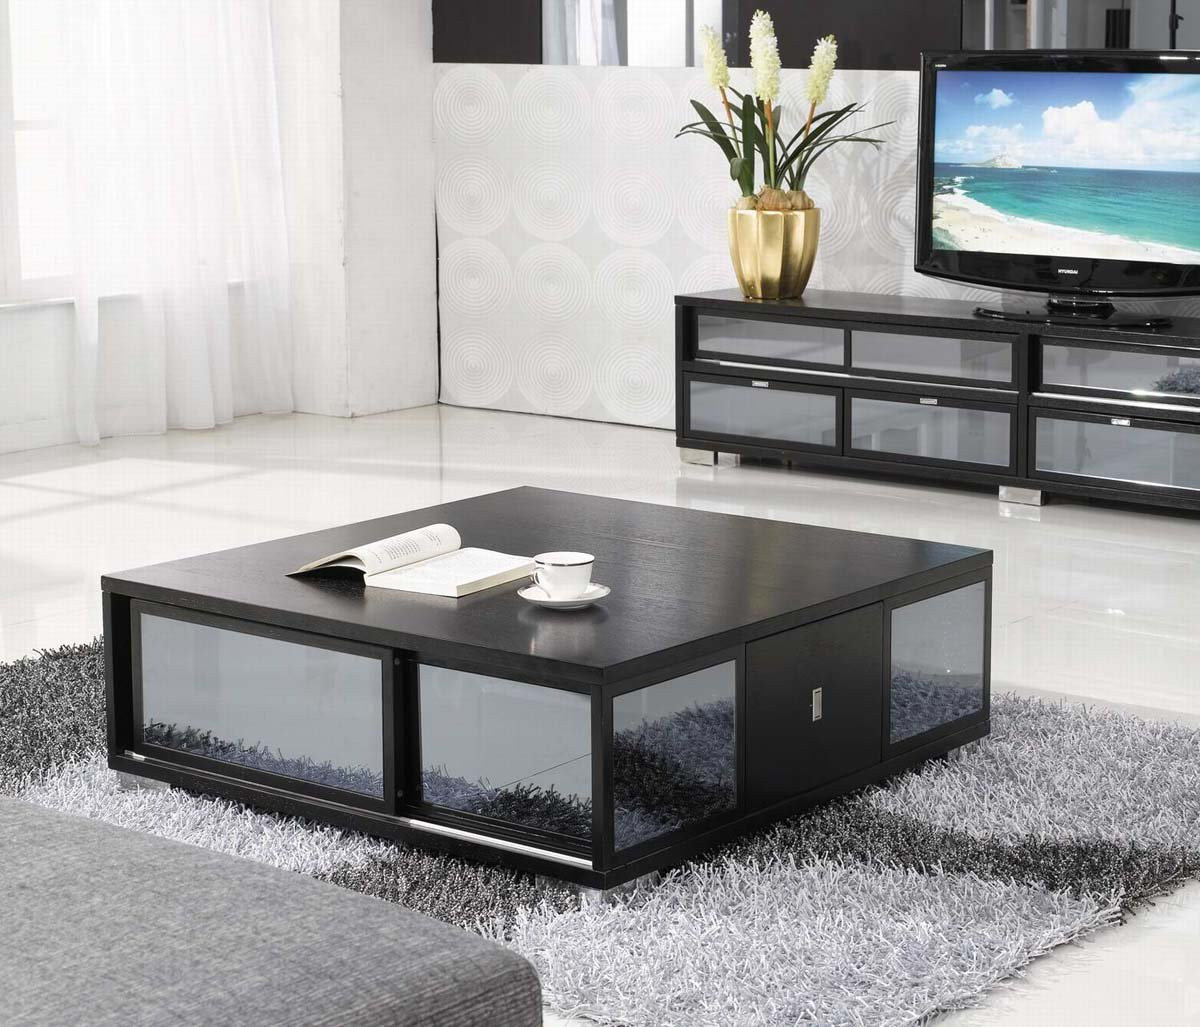 Living Room Glass Table
 Types of Tables for Living Room and Brief Buying Guide